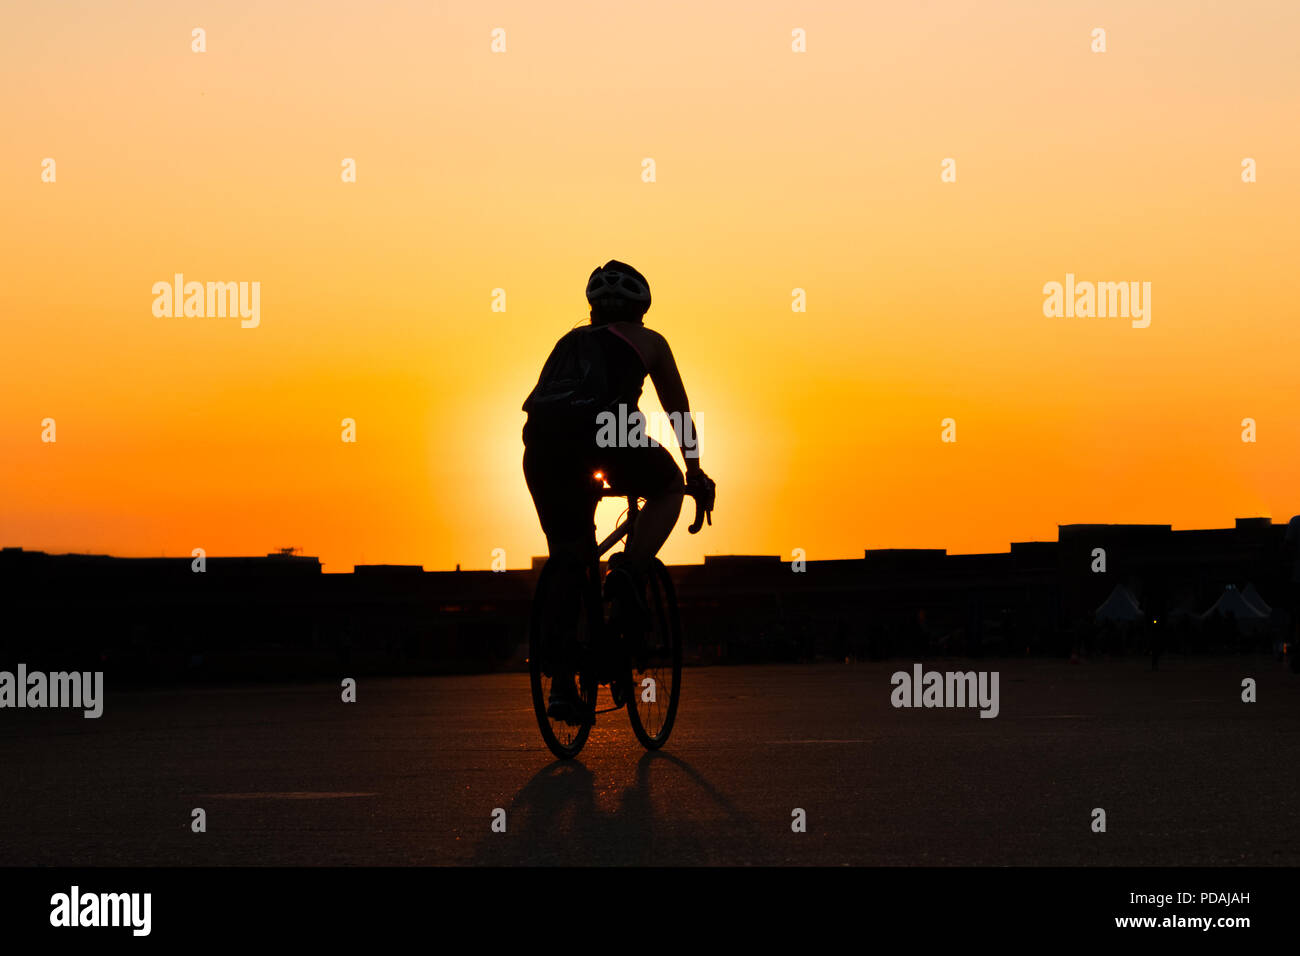 silhouette of a person riding bicycle with sunset sky background Stock Photo